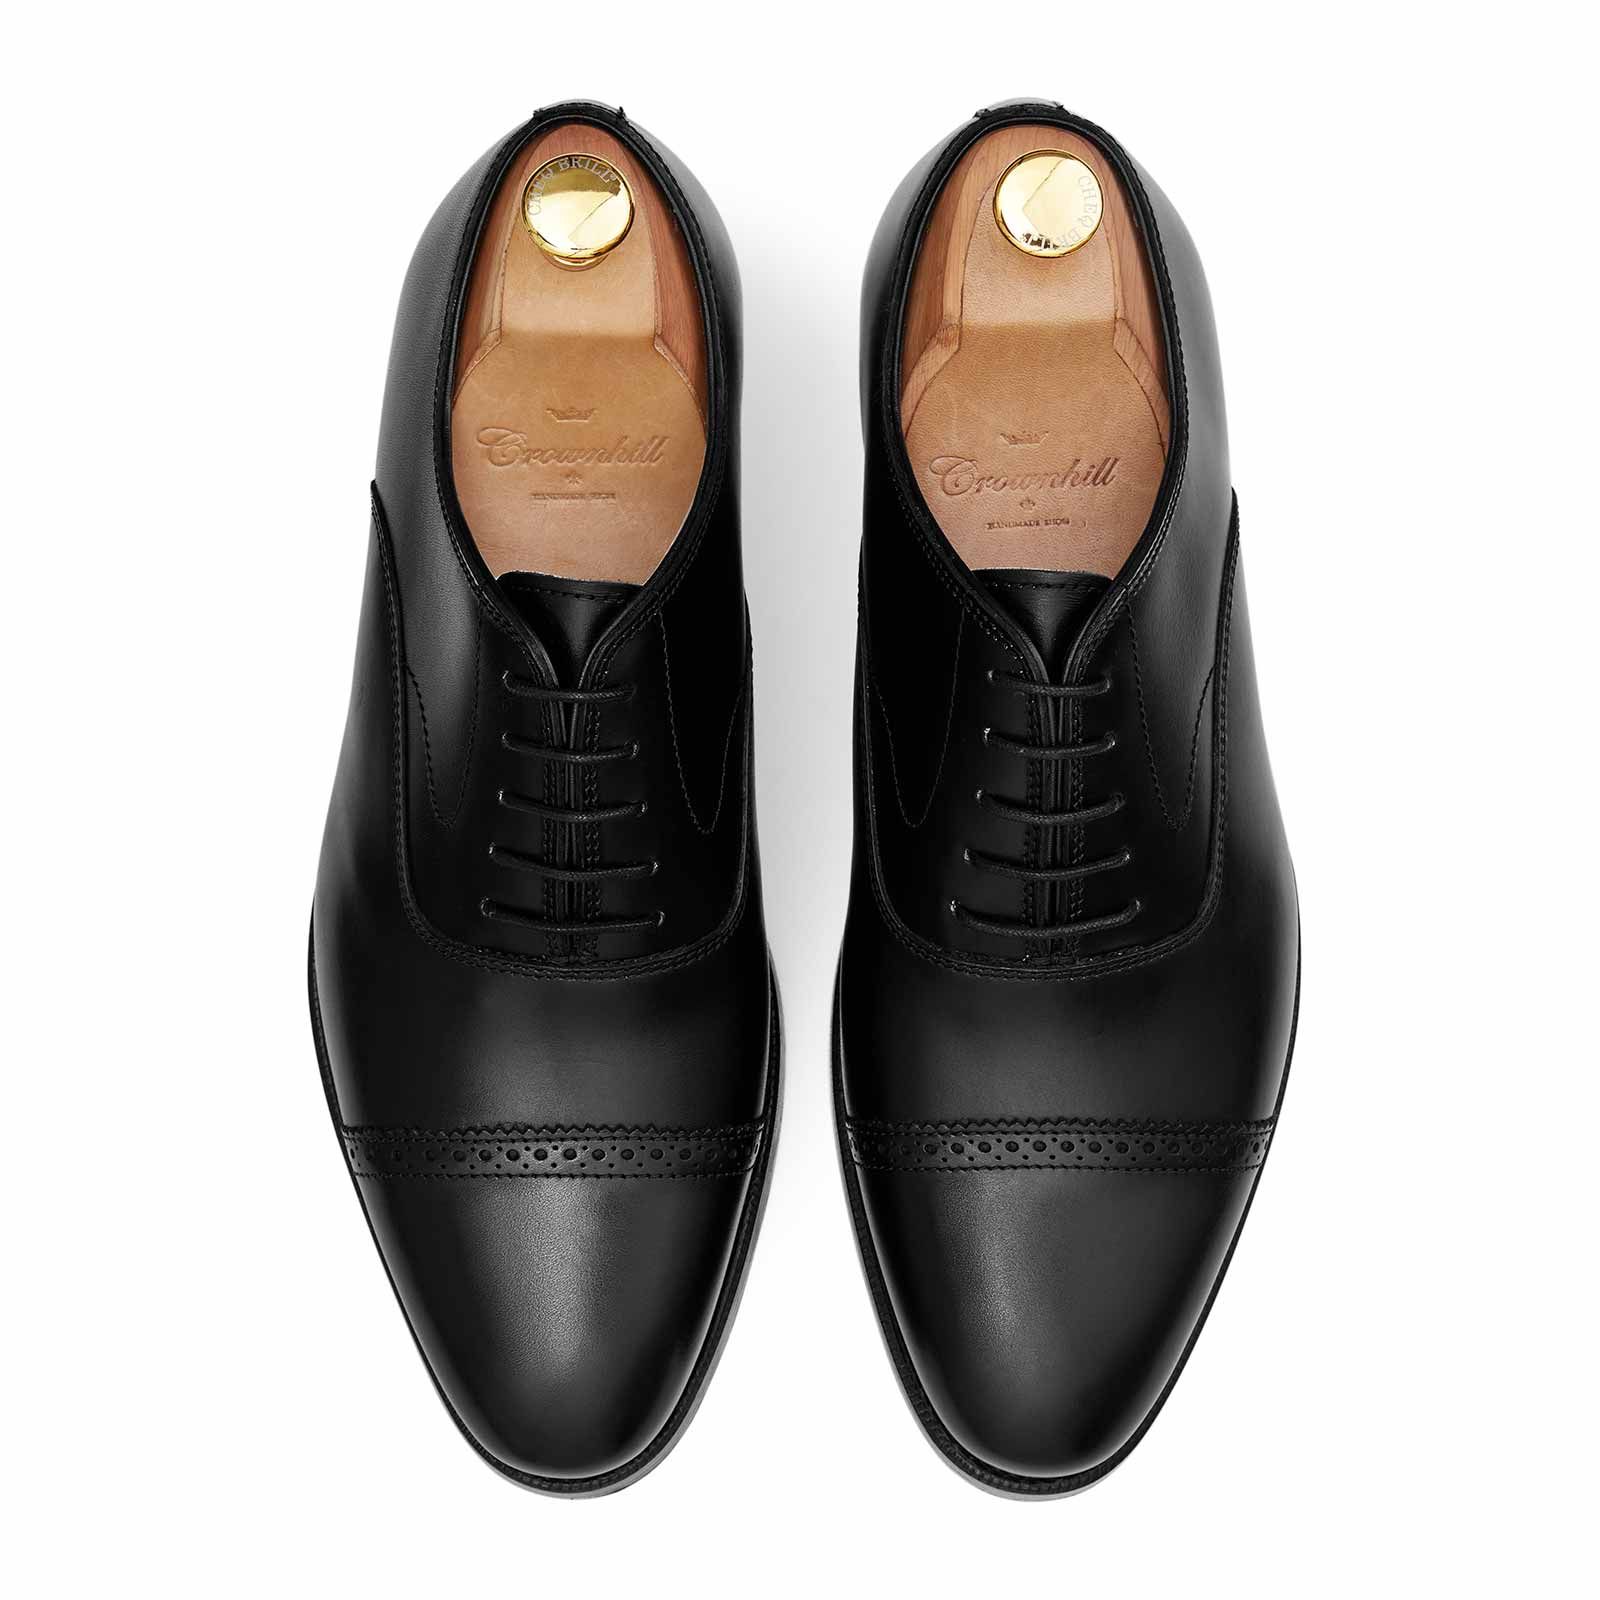 The Negro | Crownhill Shoes